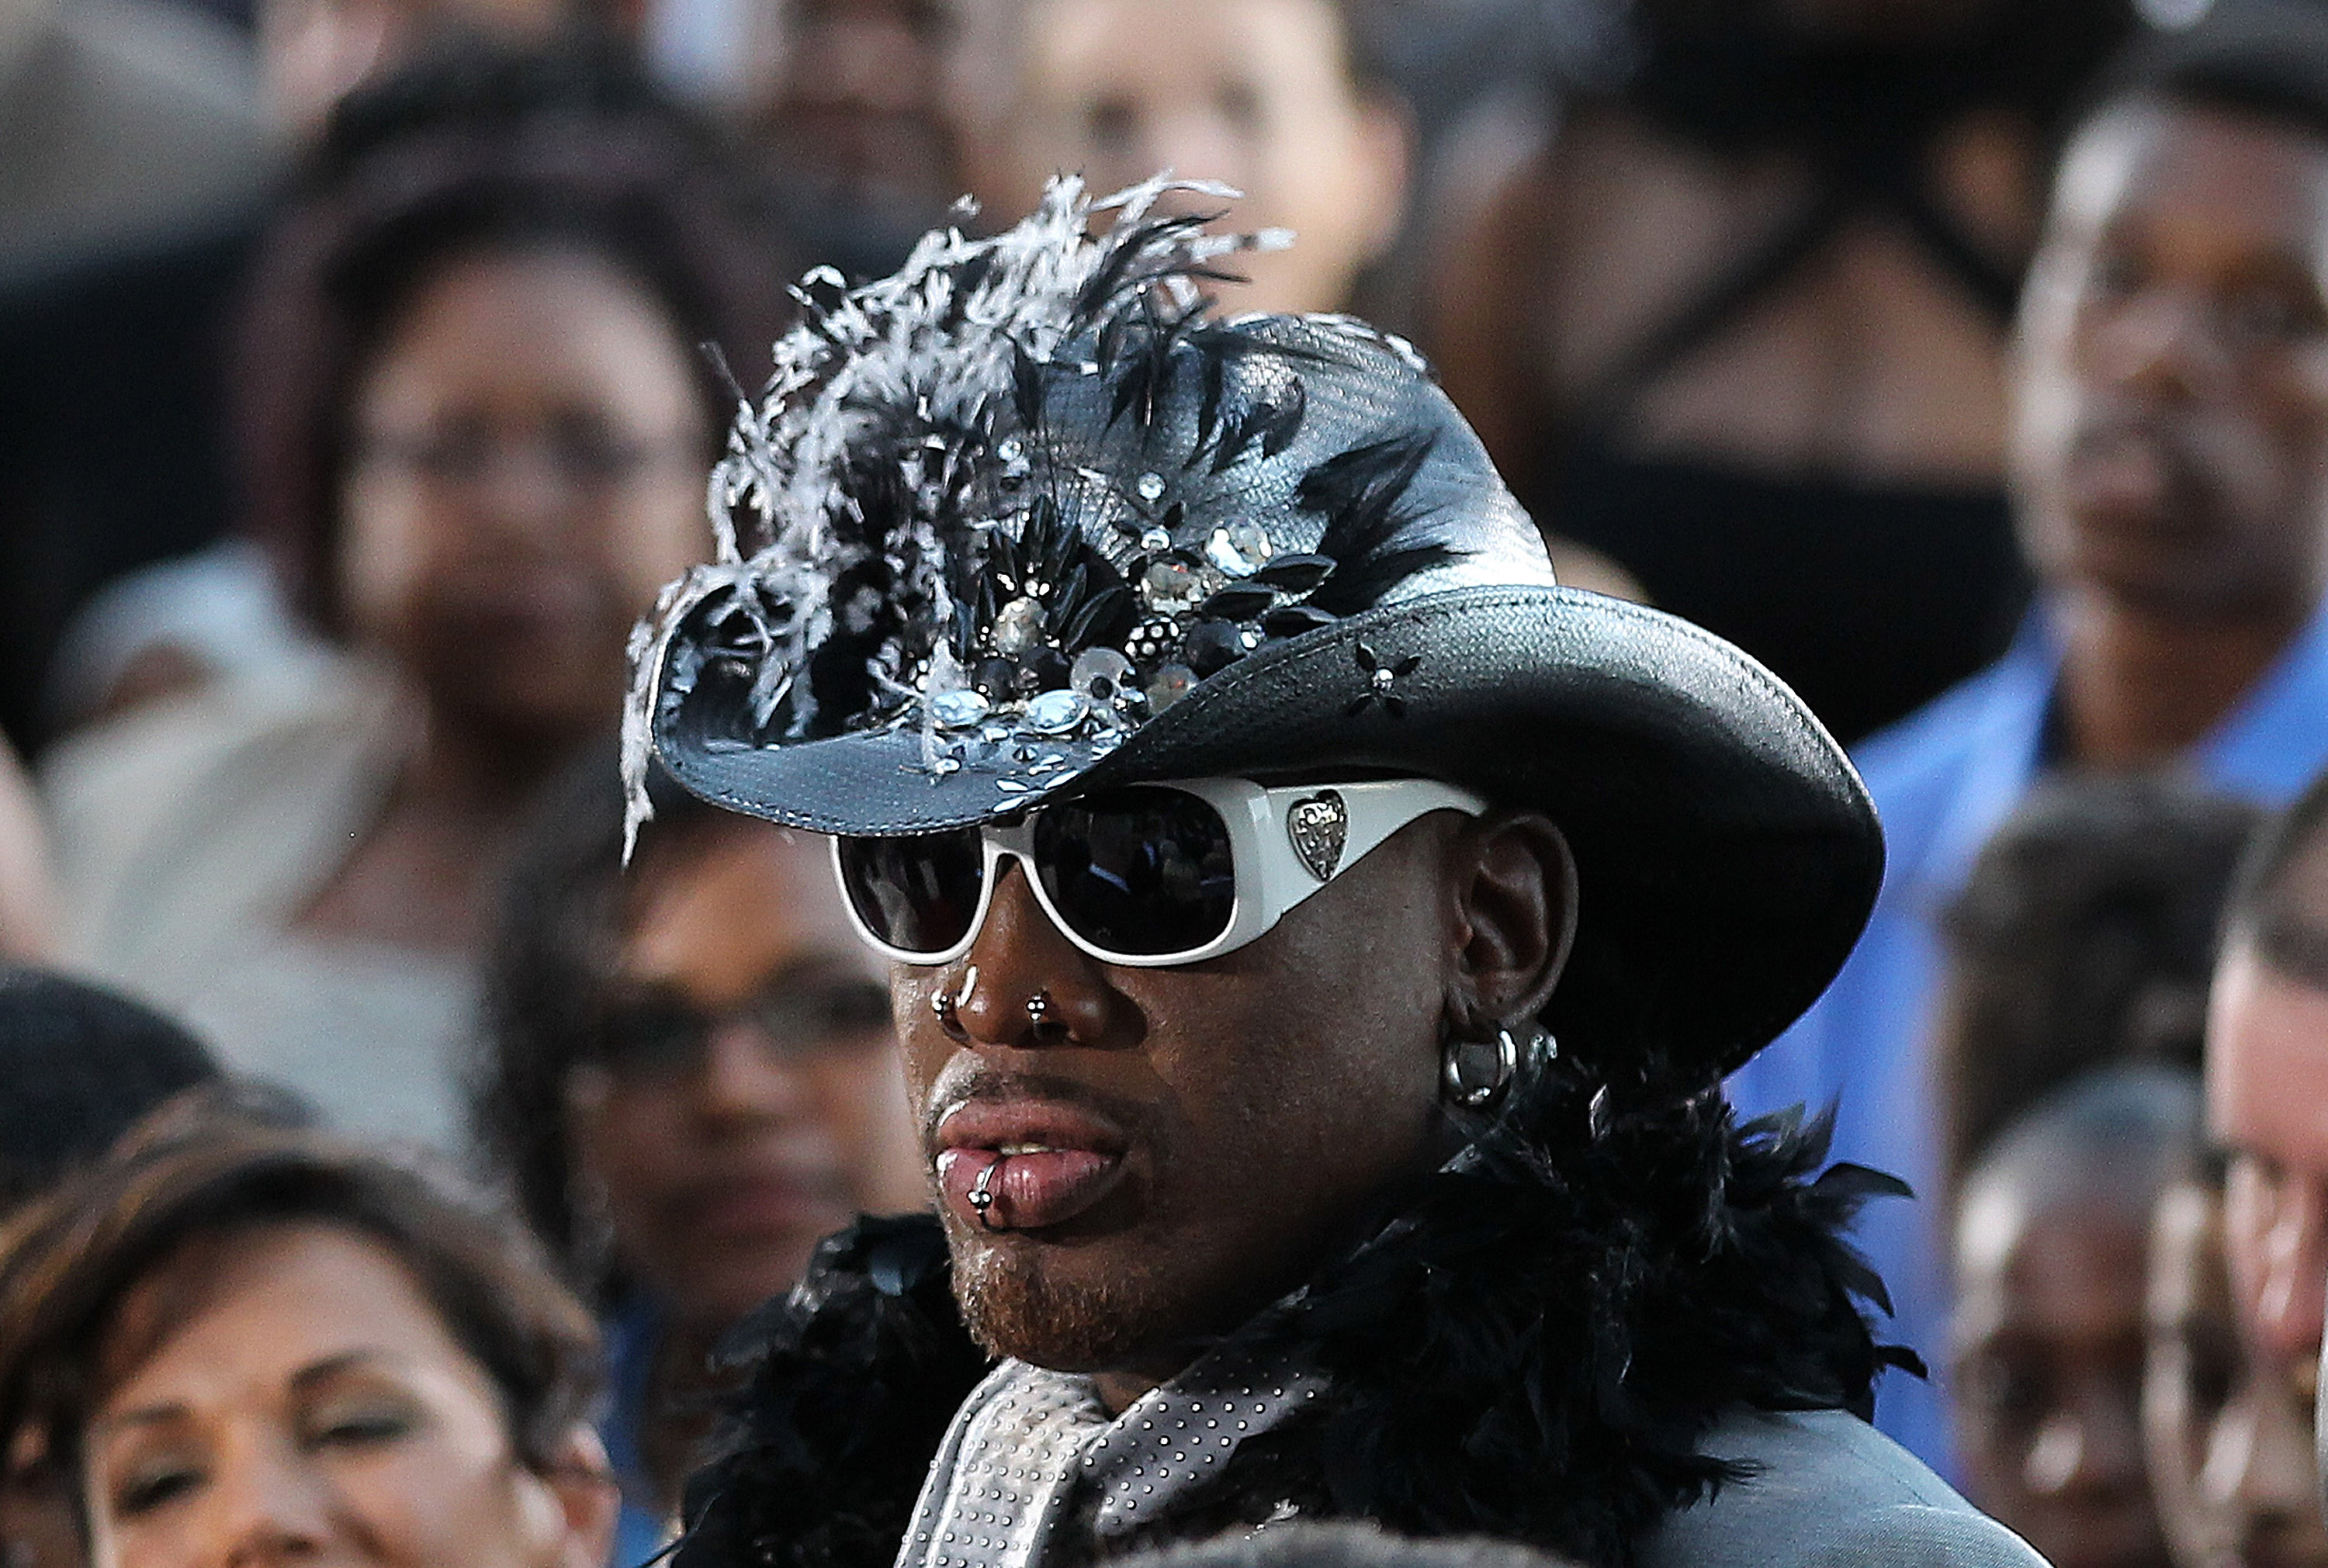 SPRINGFIELD, MA - AUGUST 12:  Inductee Dennis Rodman arrives to the Basketball Hall of Fame Enshrinement Ceremony on August 12, 2011 at the Naismith Memorial Basketball Hall of Fame in Springfield, Massachusetts.